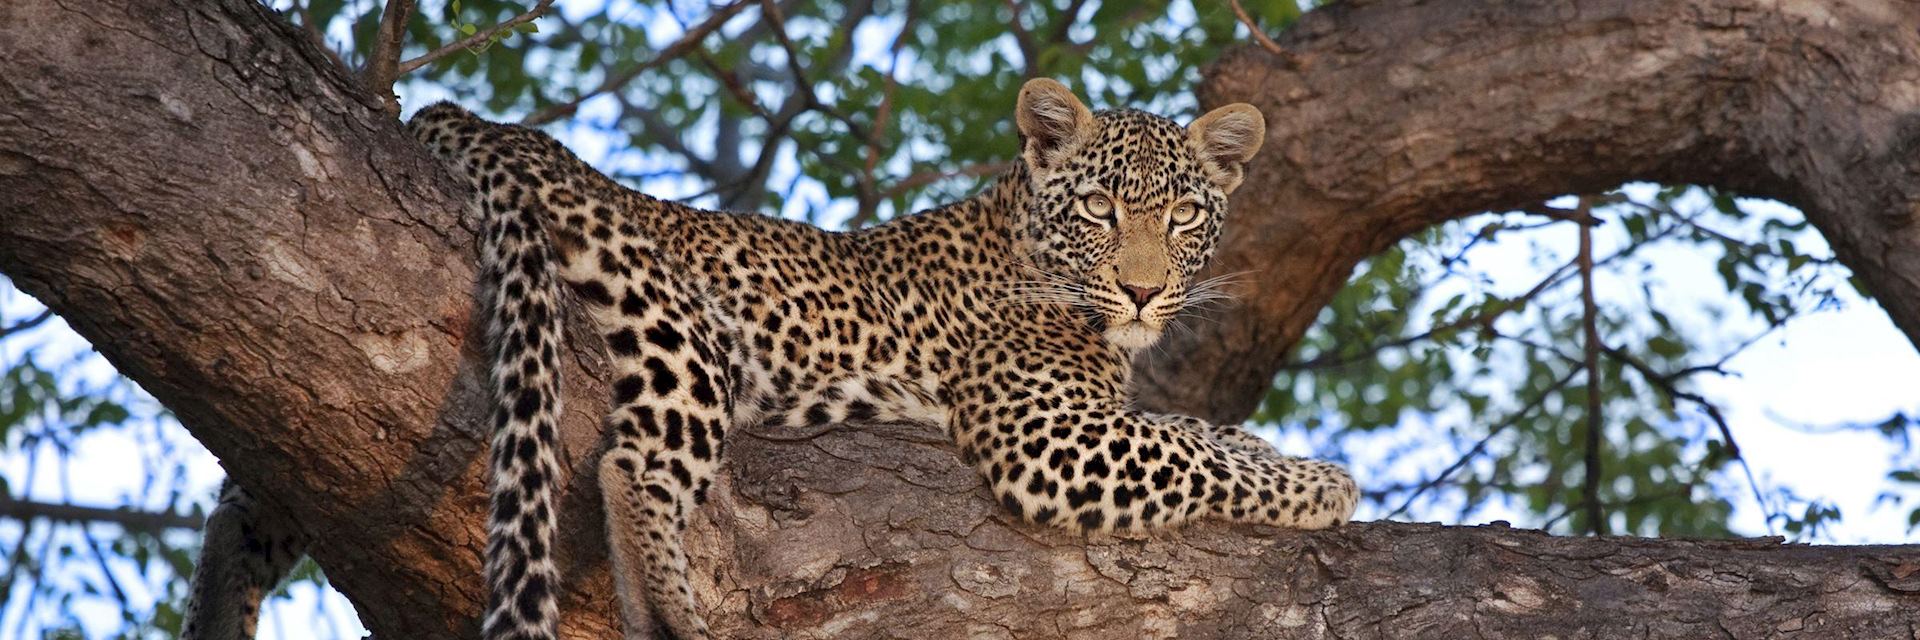 Track the Big Five on safari in South Africa